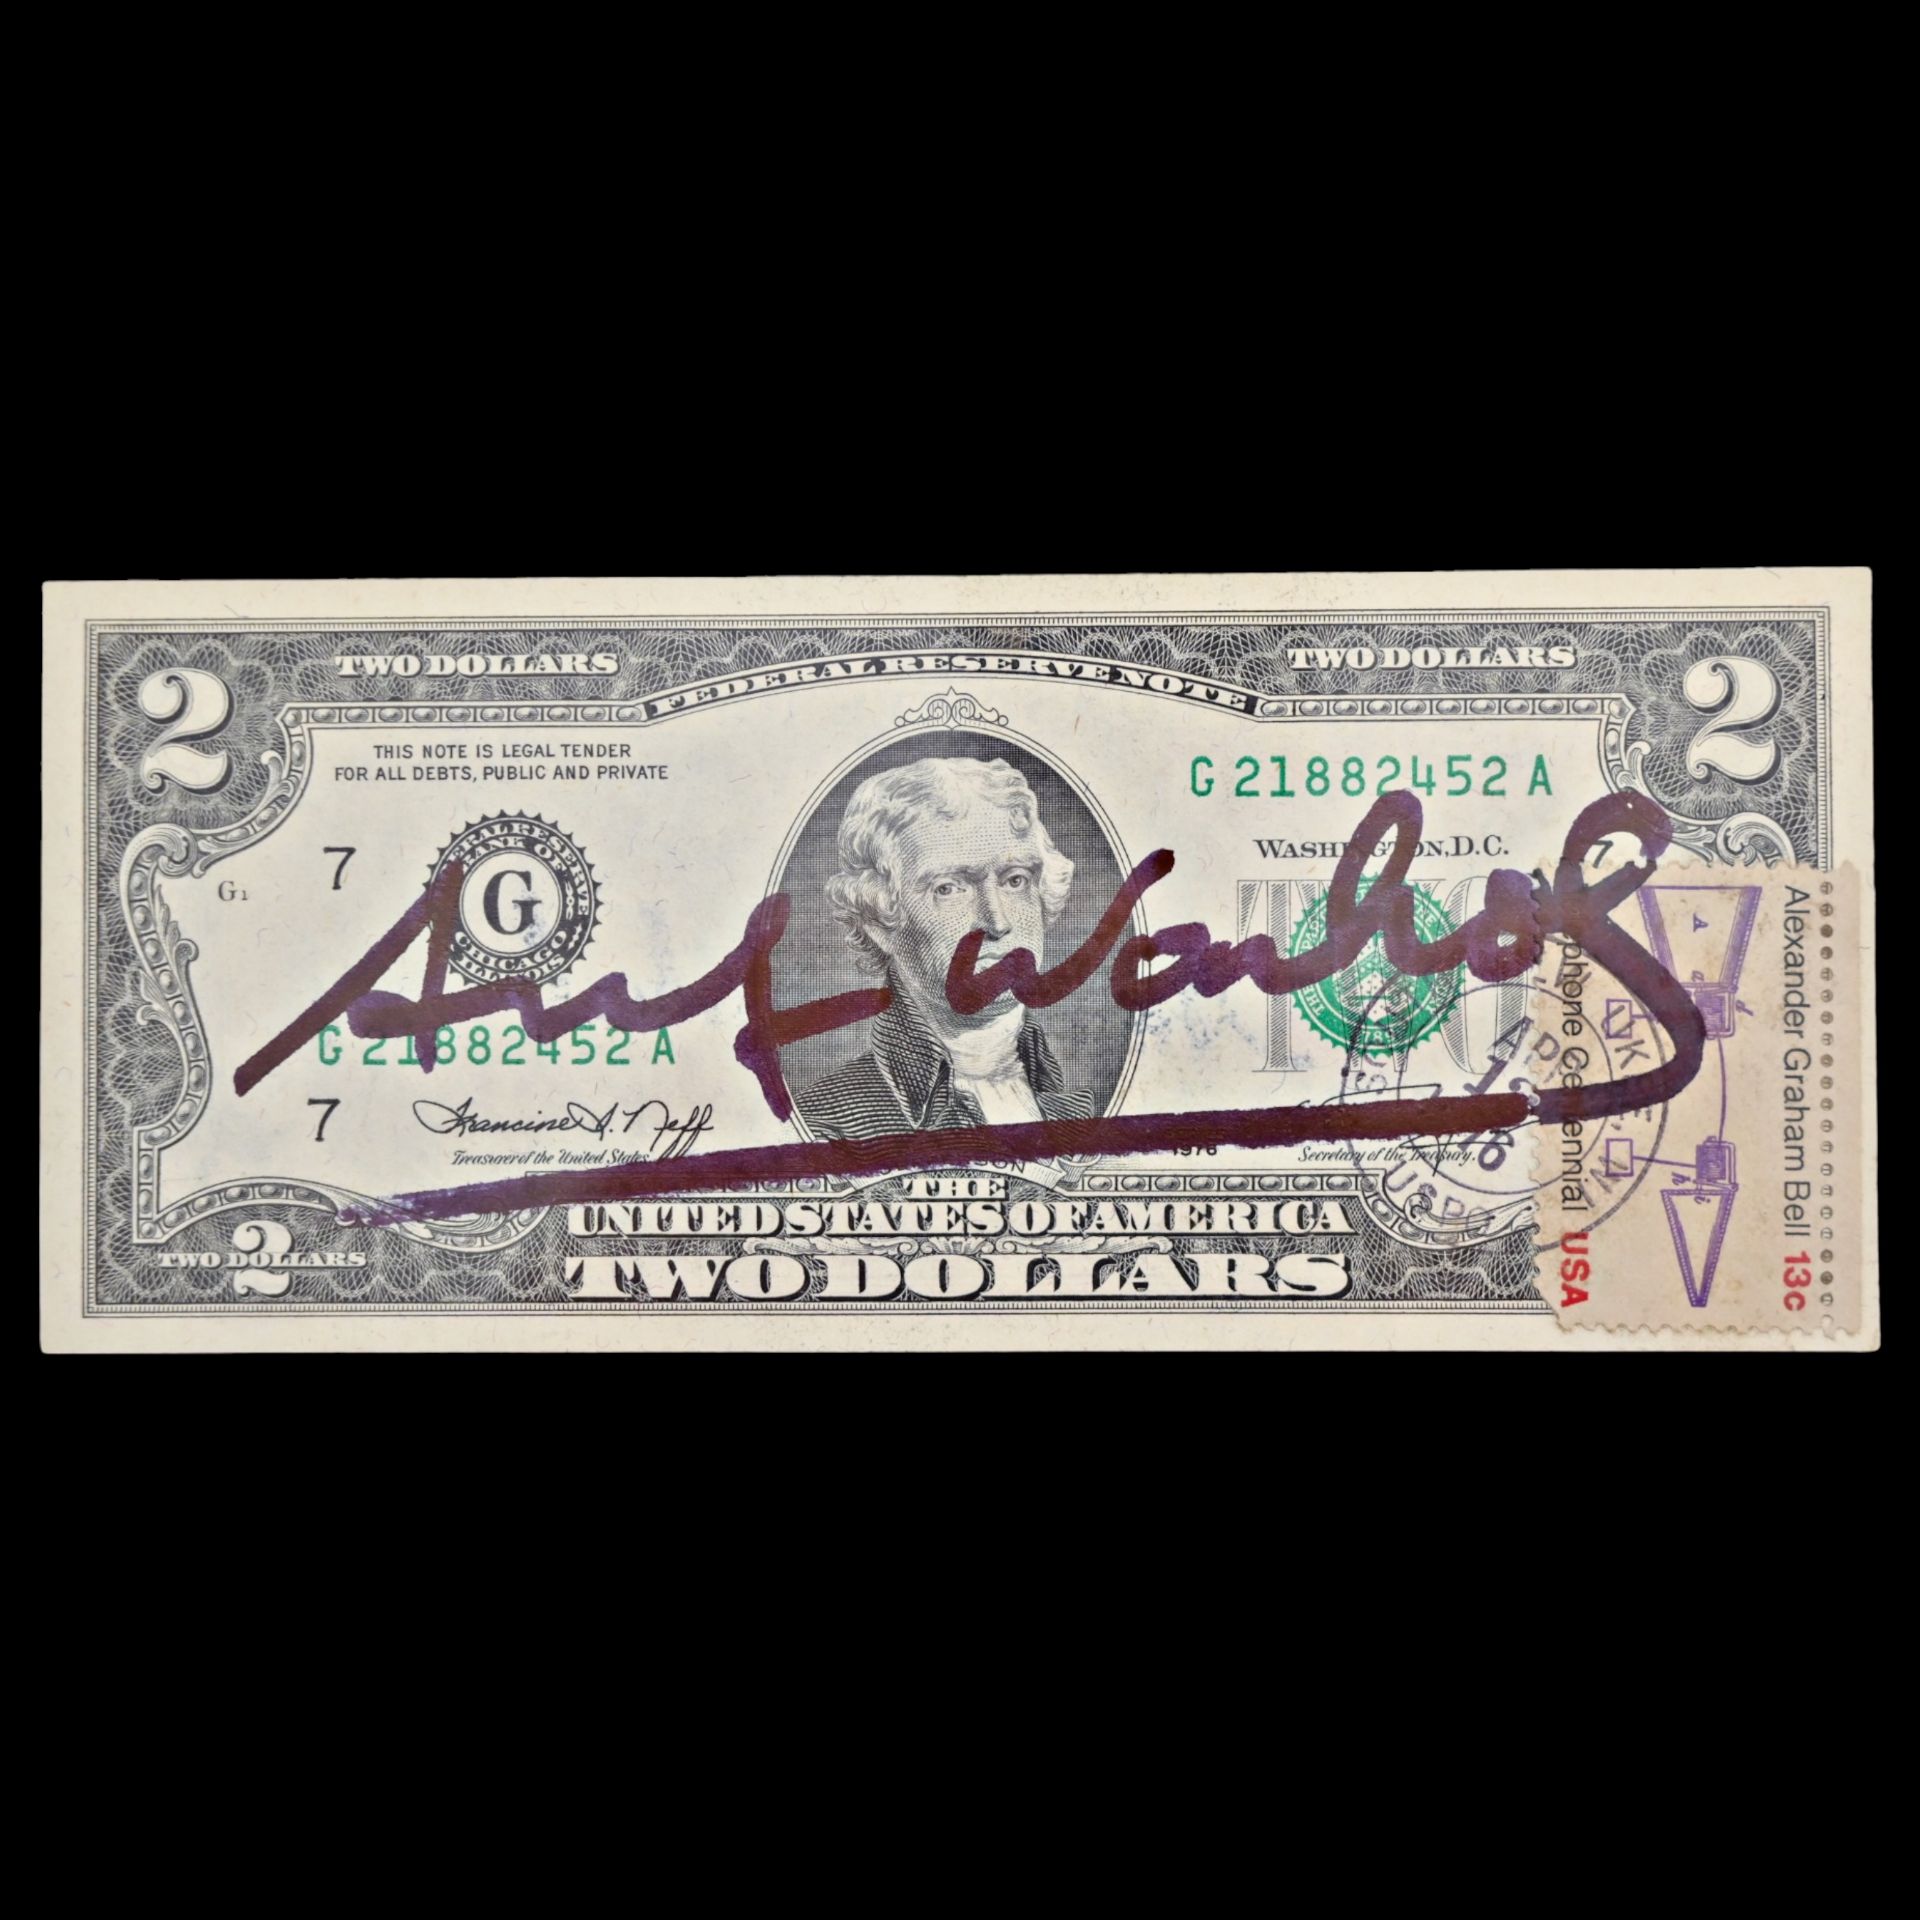 Andy WARHOL (1928 - 1987), Signed 2-dollar banknote + certificate. - Image 2 of 4